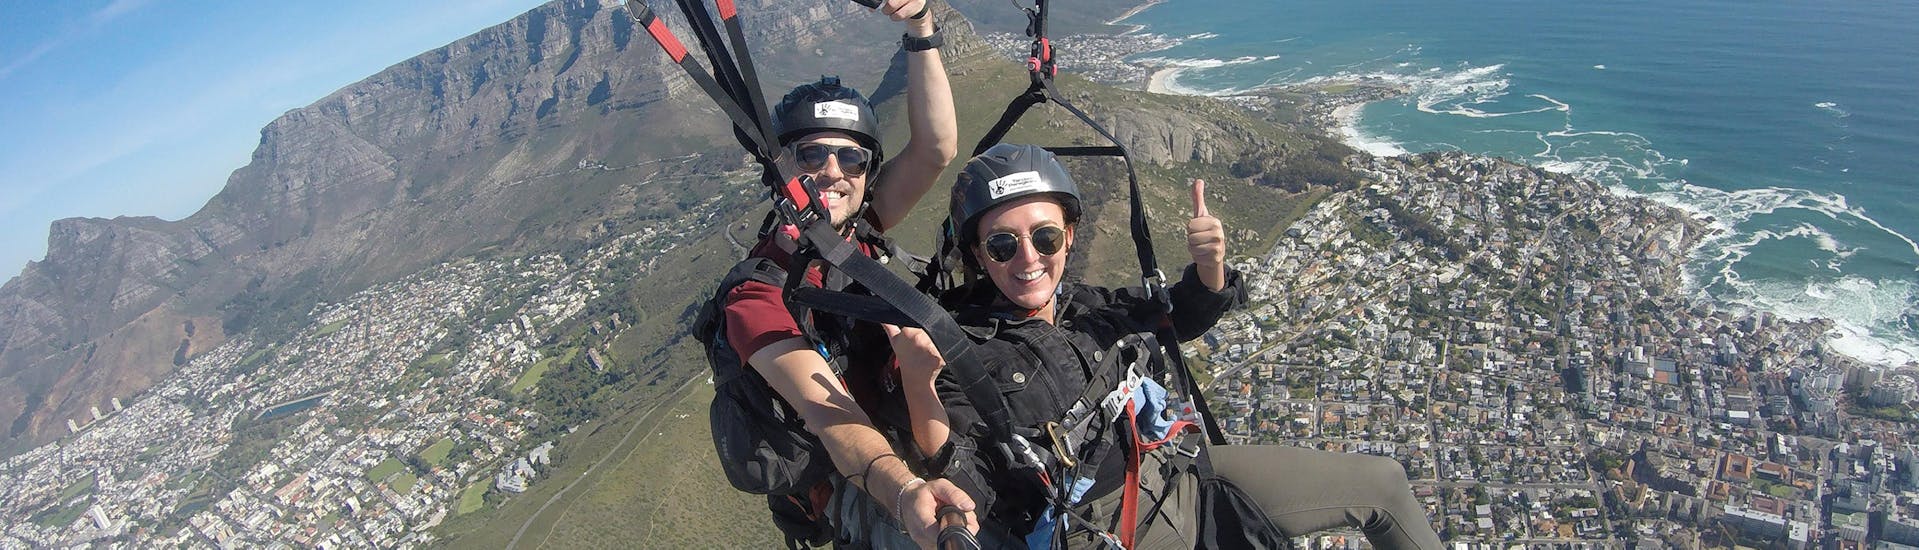 Happy woman flys with her tandem pilot over the city, enjoying the view of the sea and the mountains during paragliding in Cape Town with Hi5 Tandem Paragliding Cape Town.